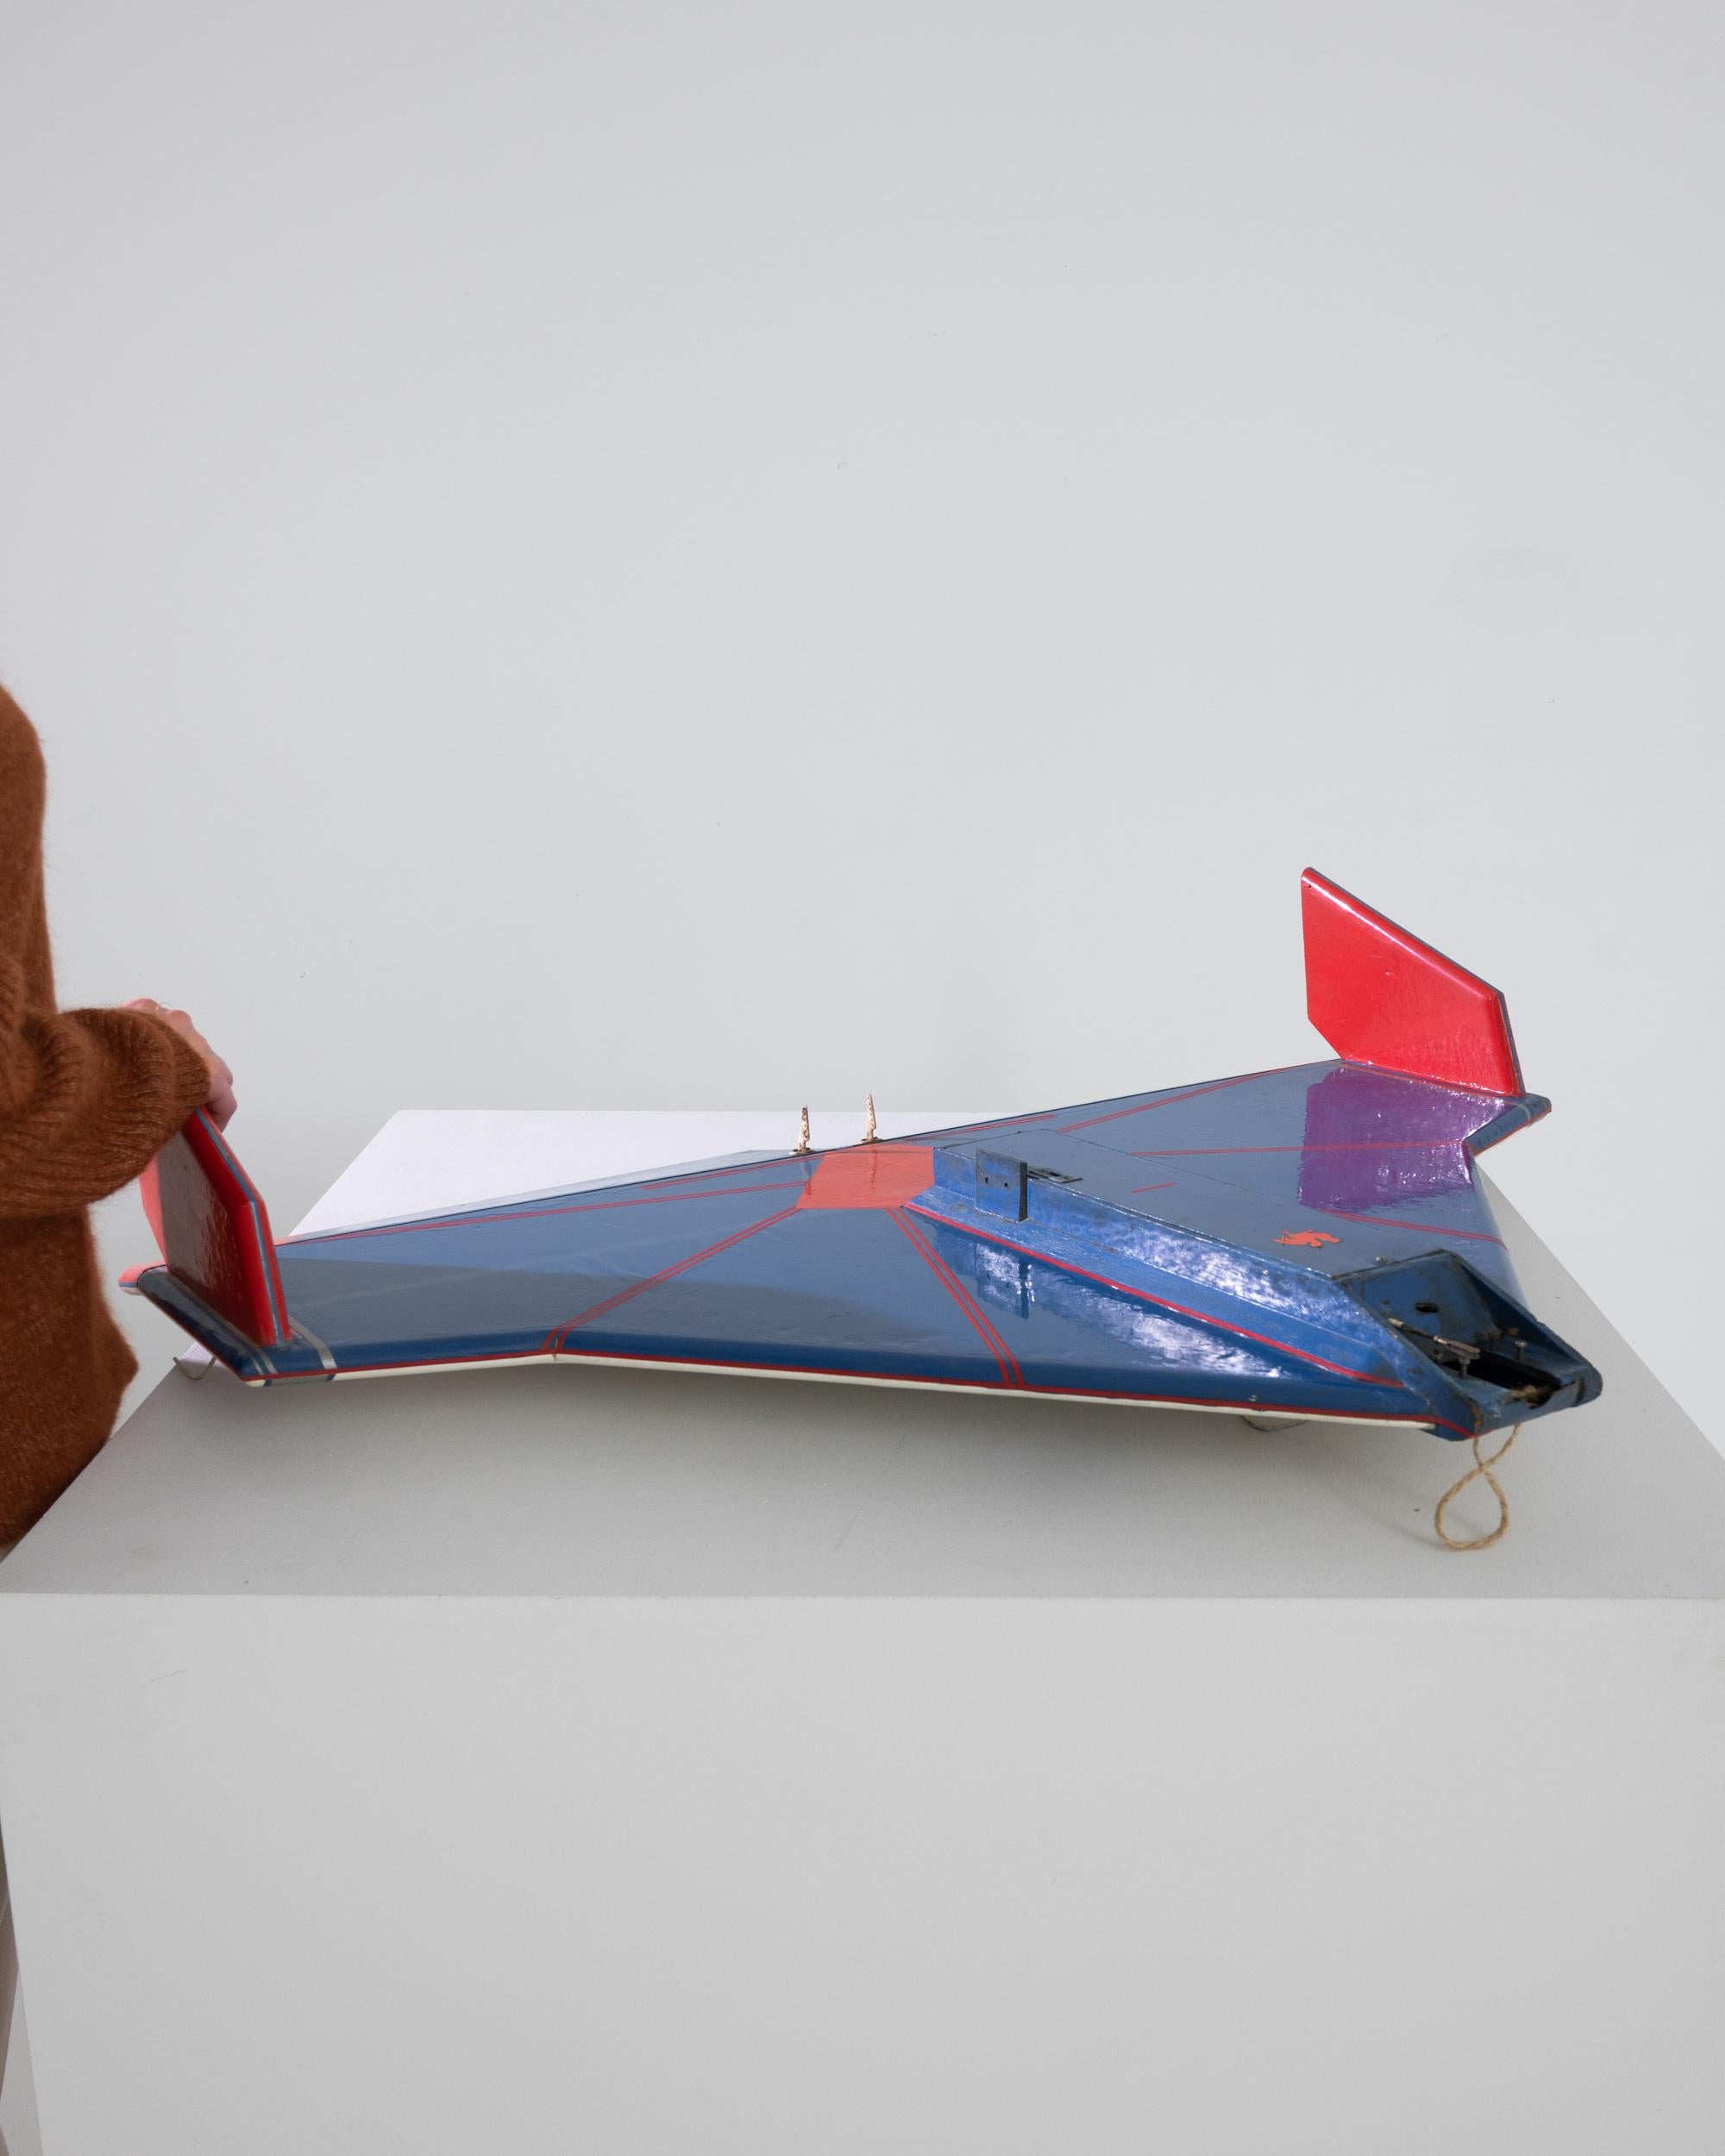 This 20th Century Belgian Model Plane is a remarkable collectible, capturing the spirit of vintage aviation with its striking blue body and bold red accents. Crafted with meticulous attention to detail, the plane features a sturdy metal